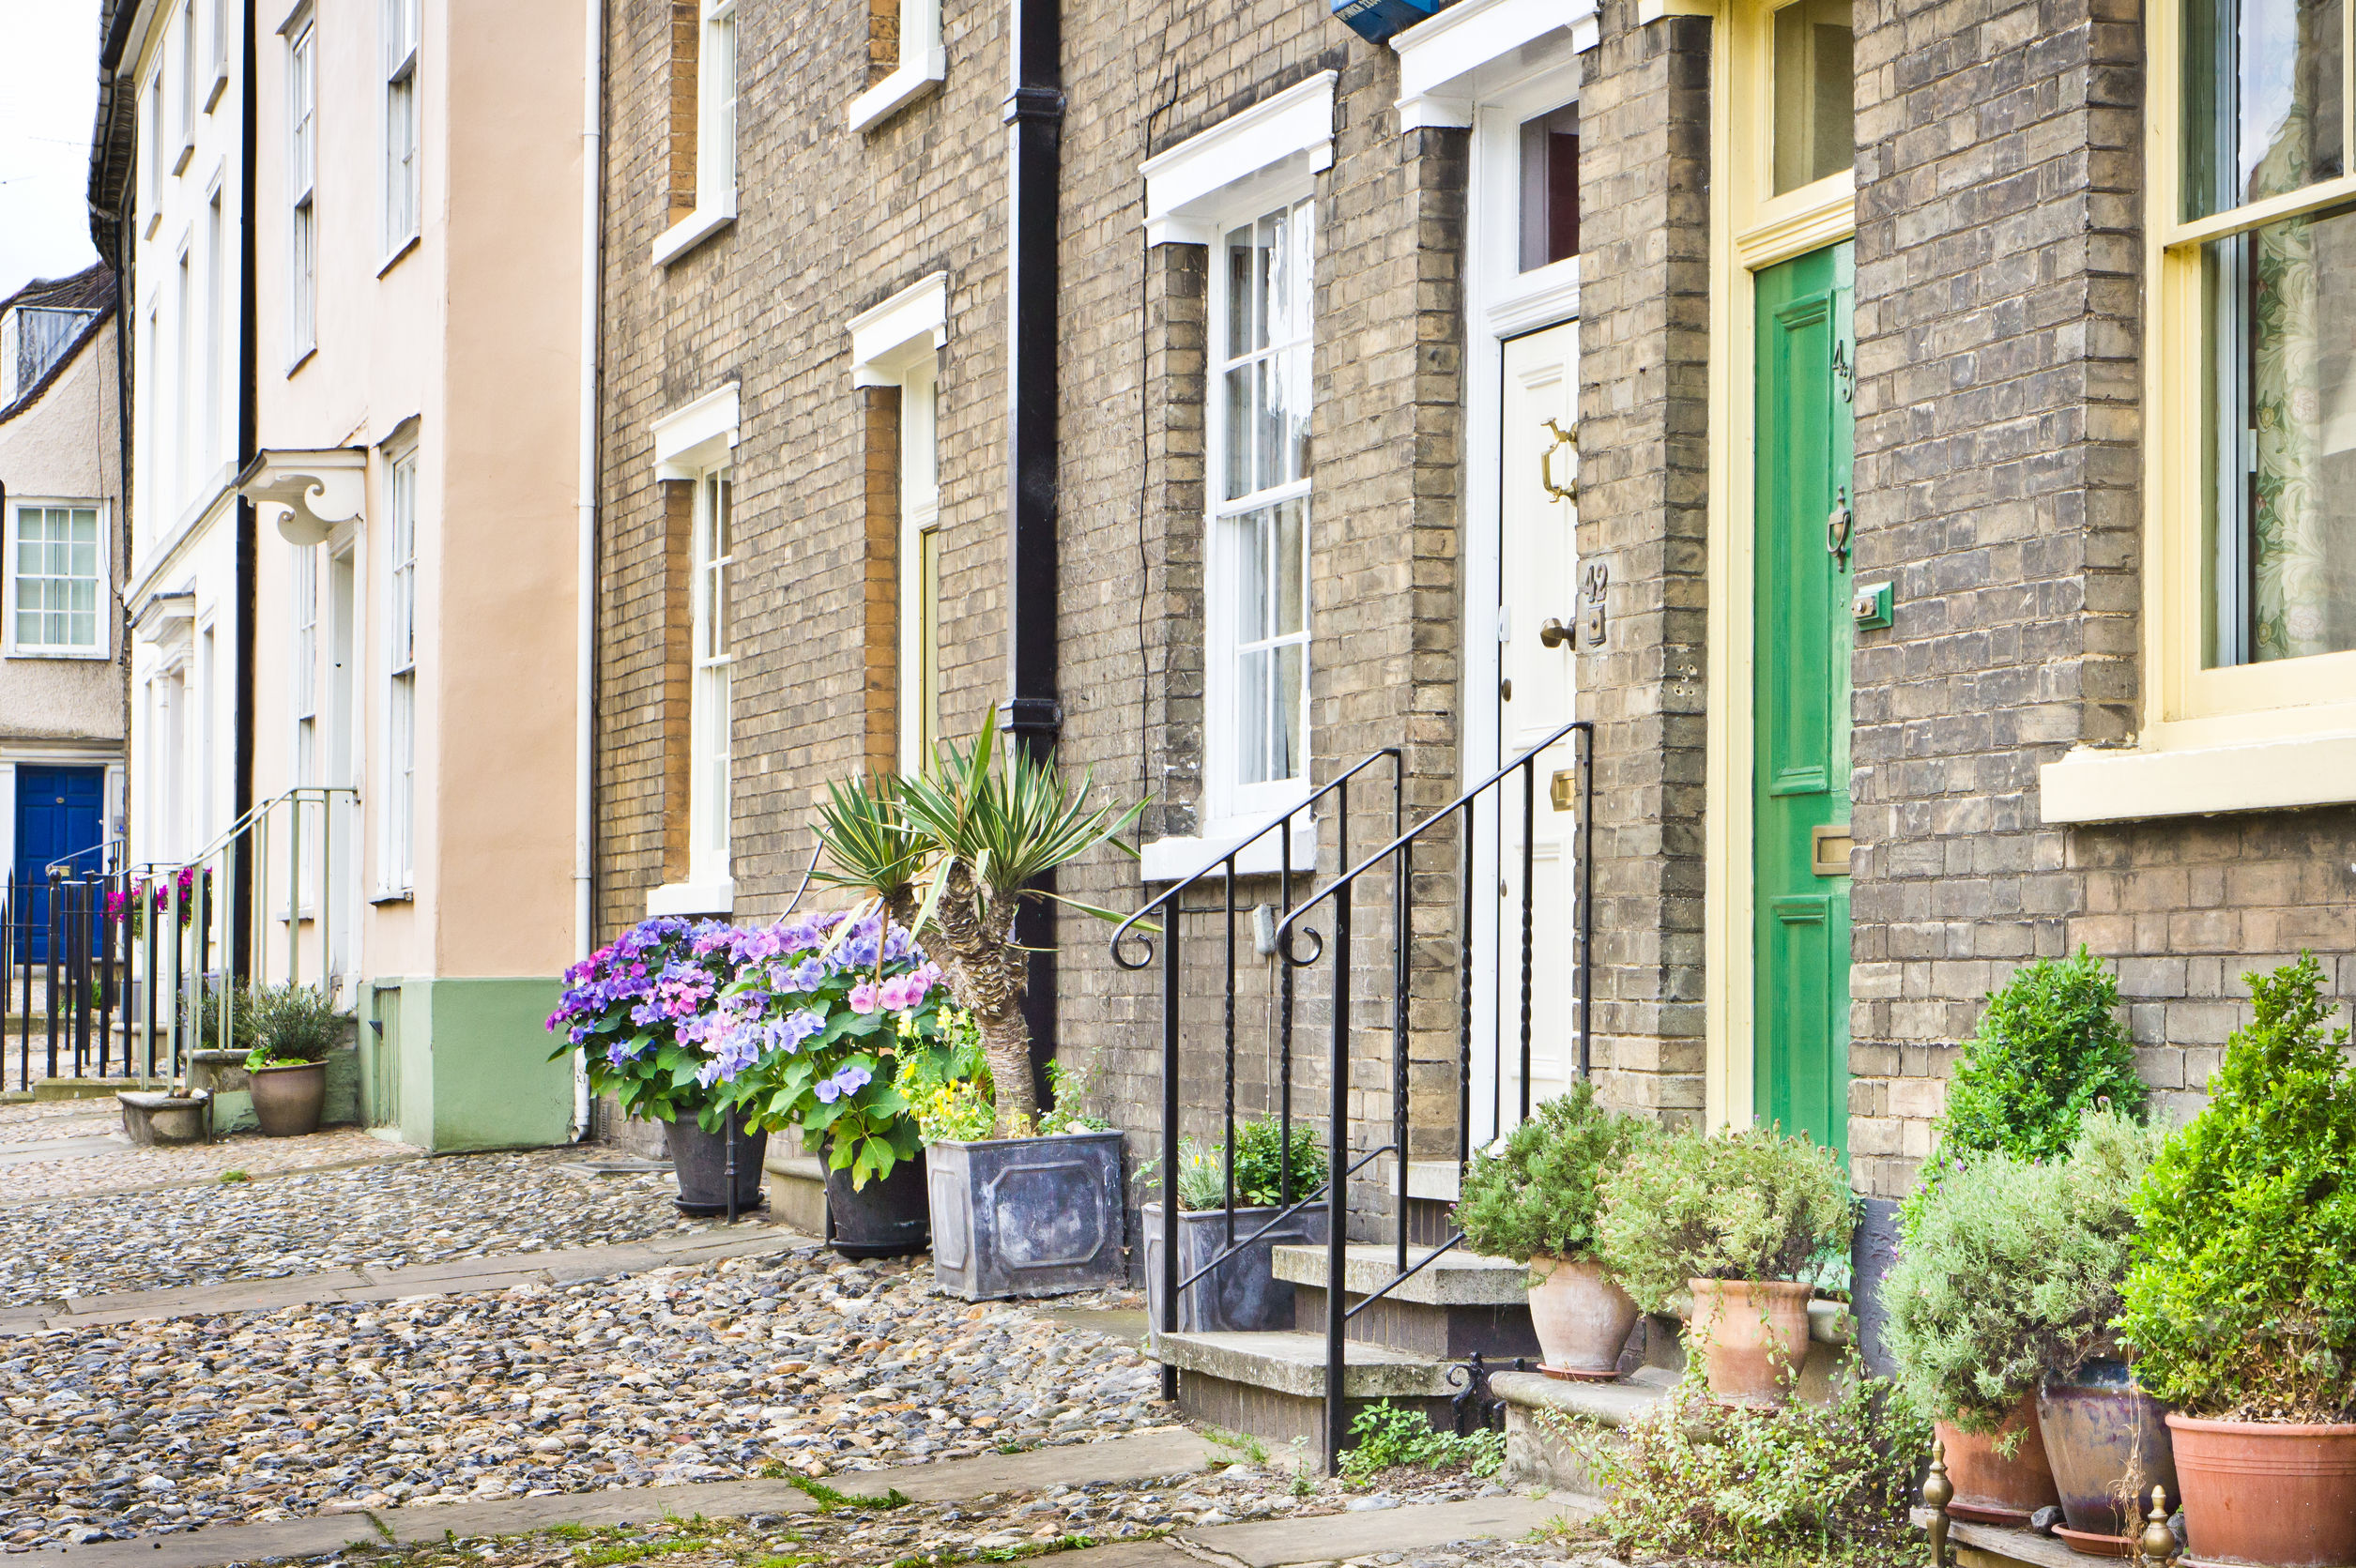 Town houses with plants in Bury St Edmunds, UK